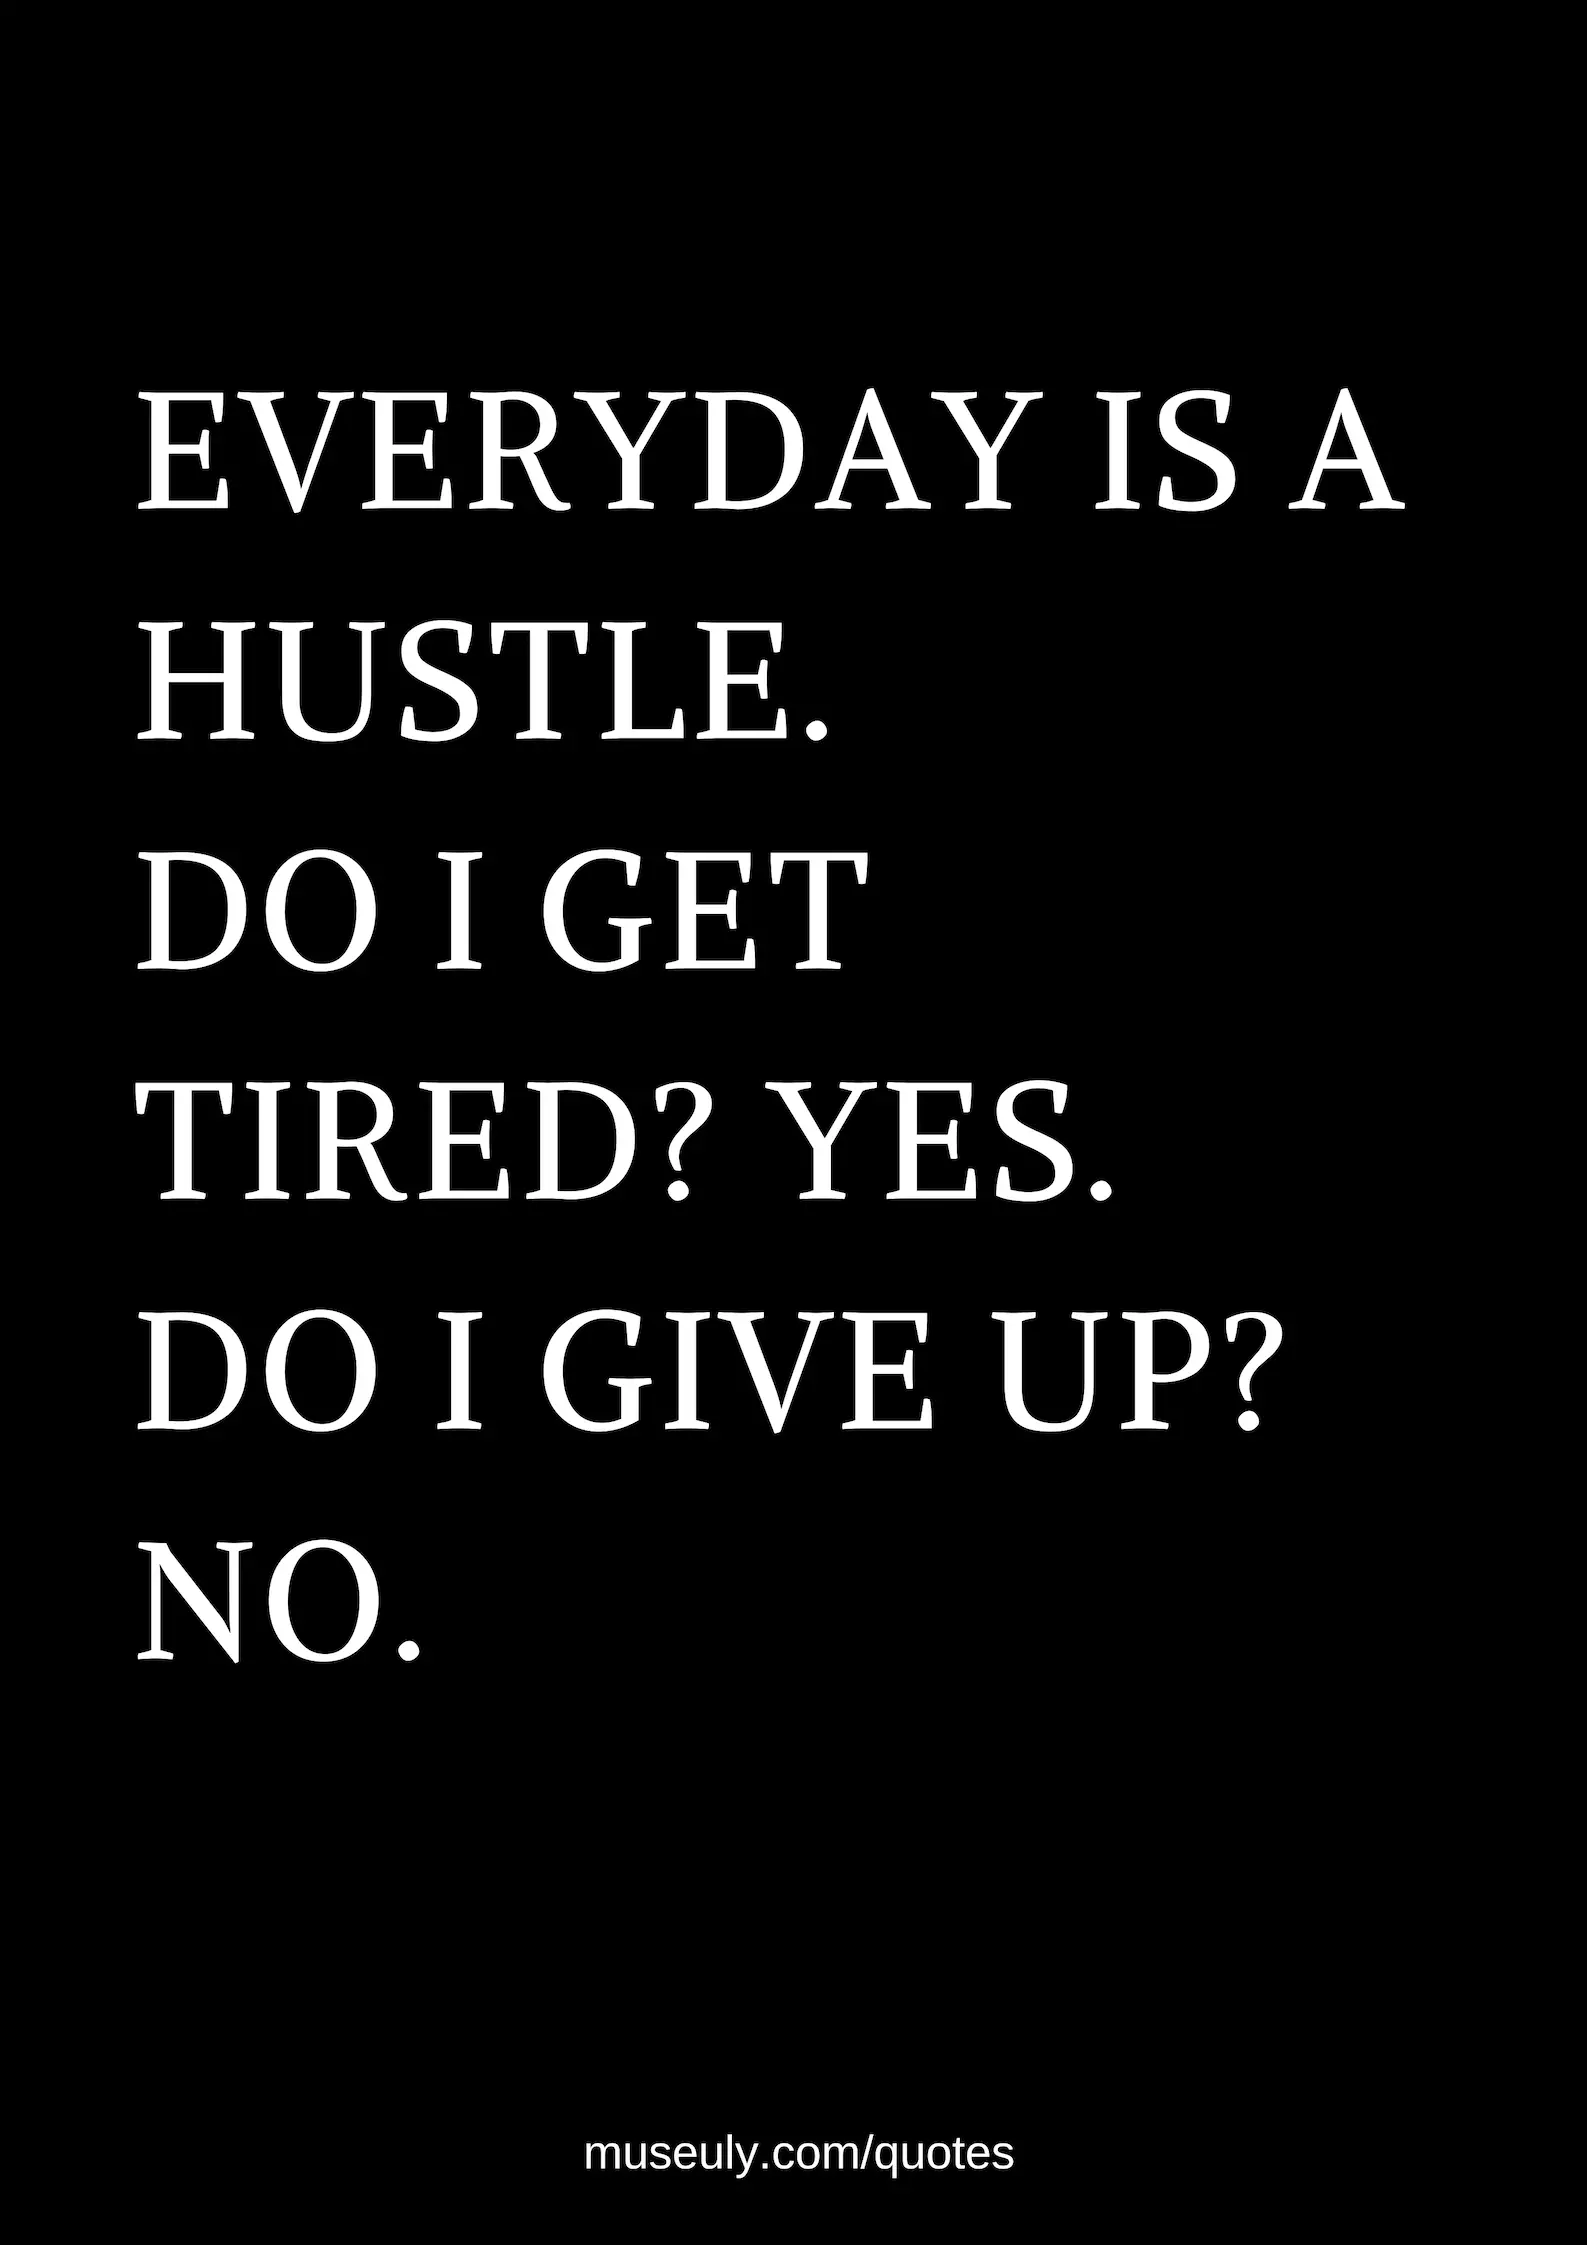 Hustle quotes (14) - museuly